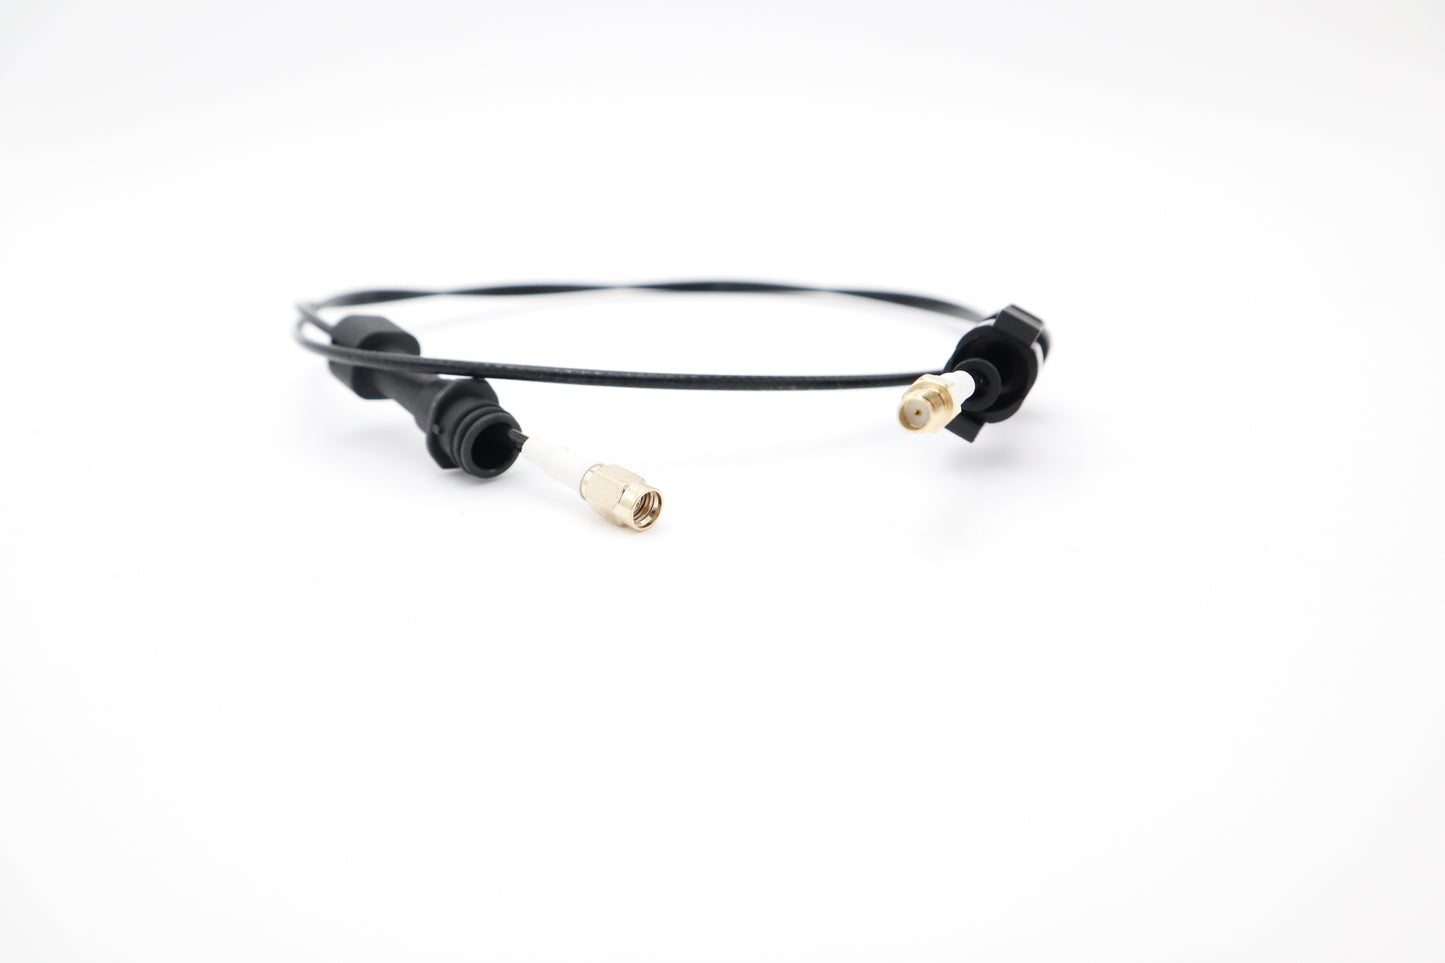 DJI Agras T40 RTK Coaxial Cable